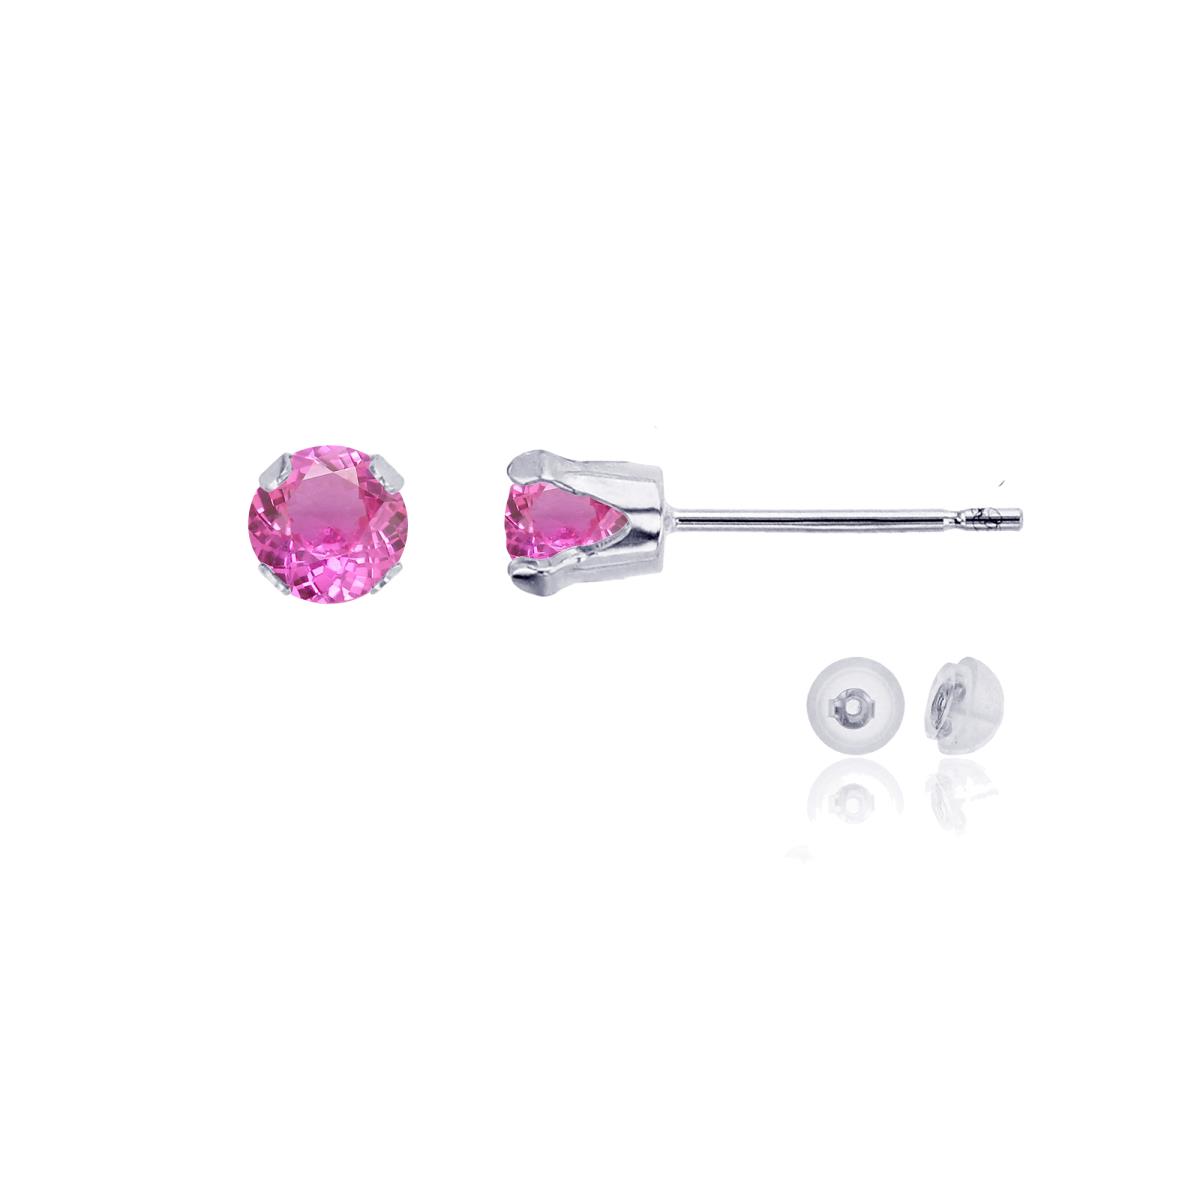 10K White Gold 4mm Round Cr Pink Sapphire Stud Earring with Silicone Back